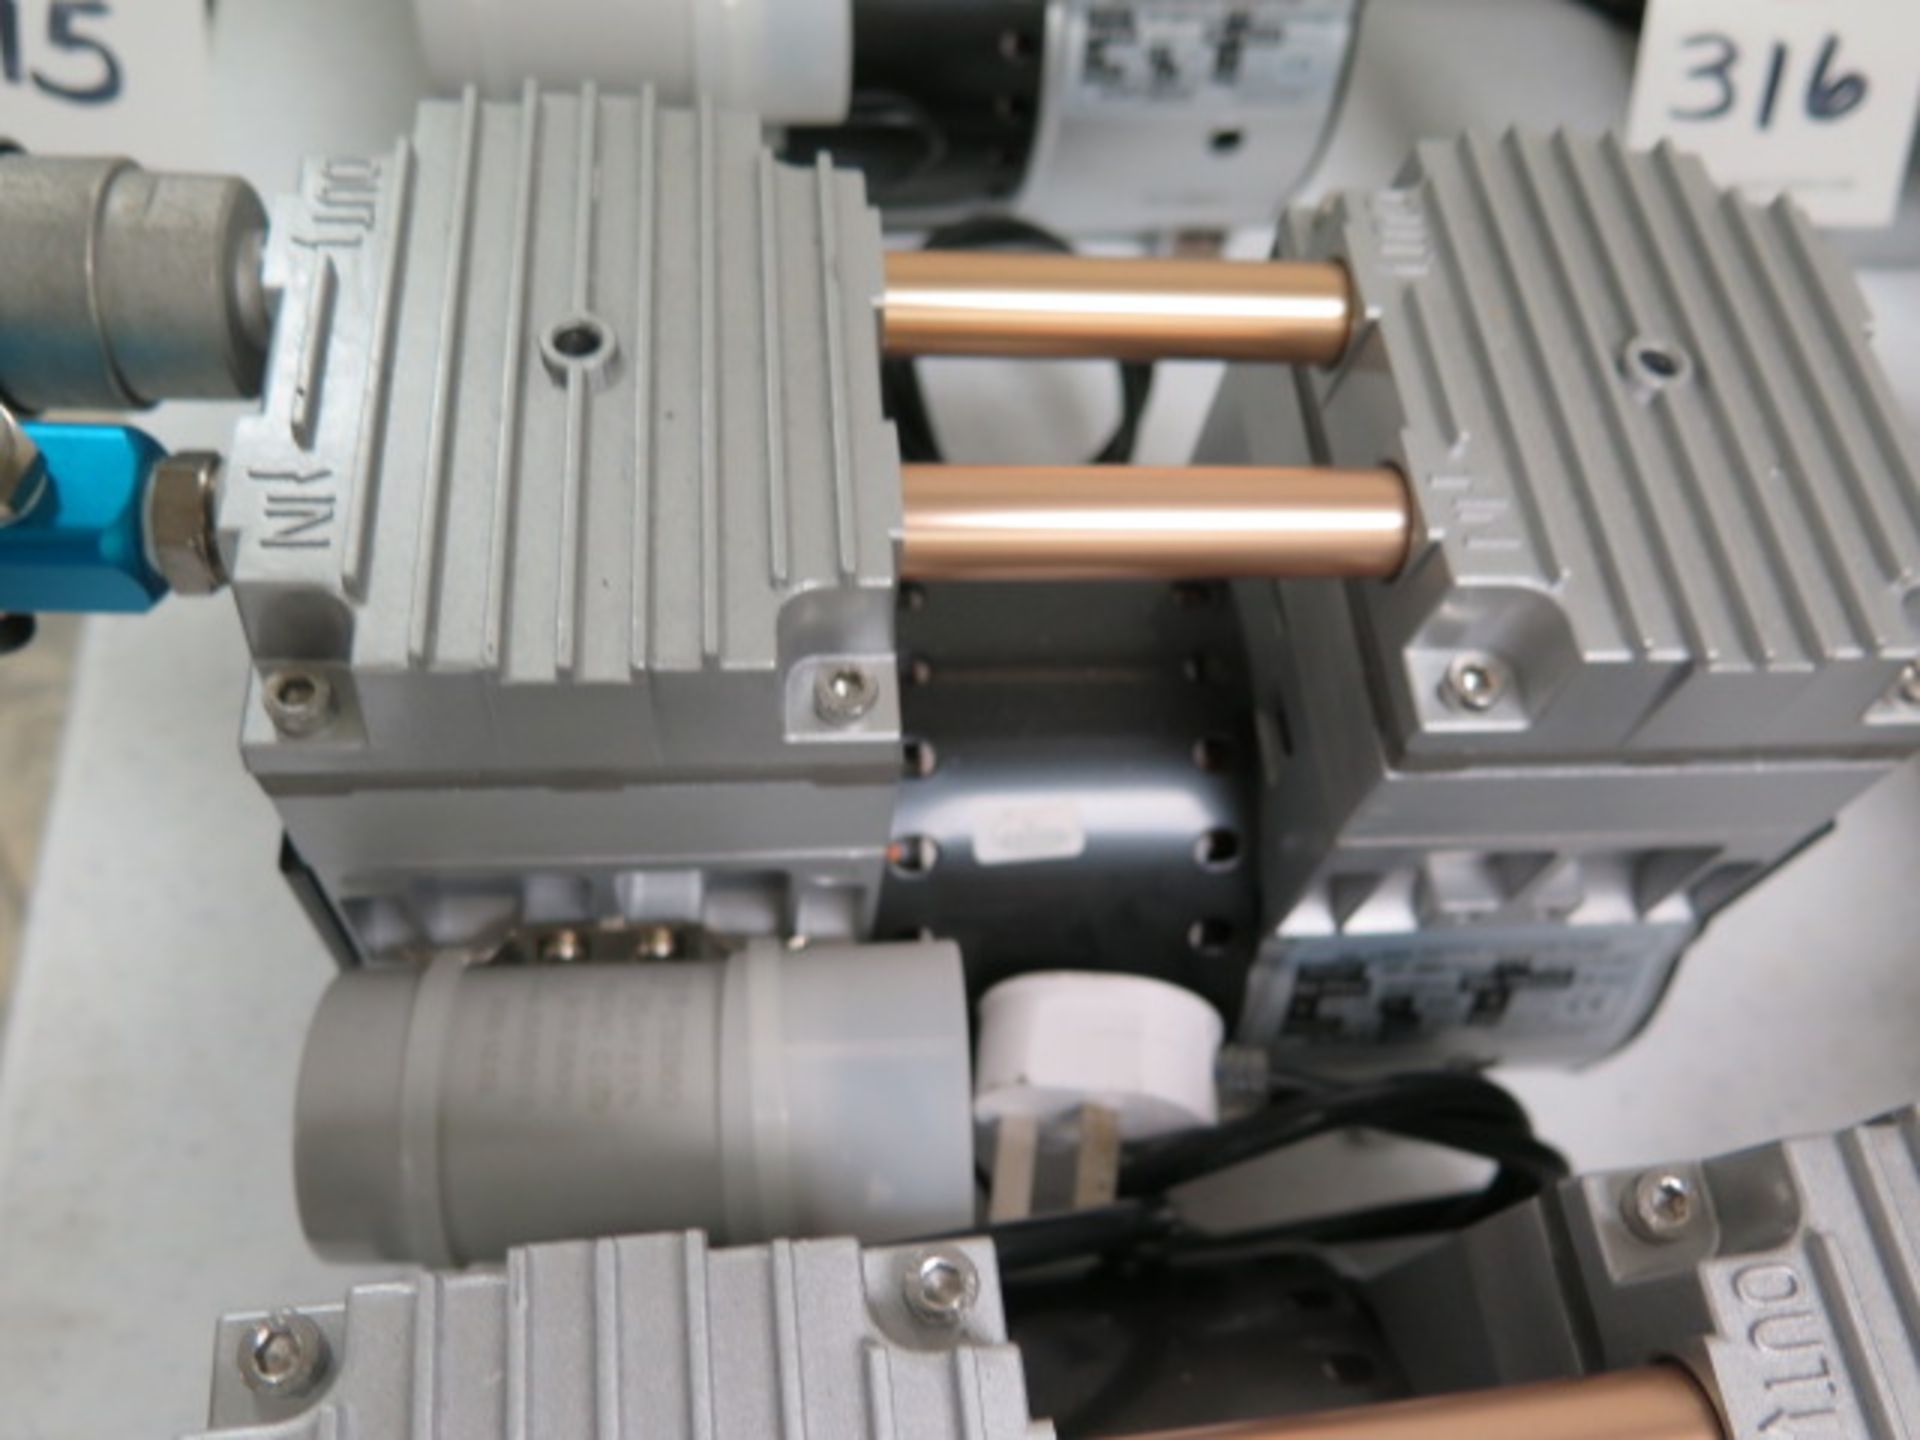 Airtech HP-200V 80 torr Vacuum Pumps (2) 200-240V (SOLD AS-IS - NO WARRANTY) - Image 5 of 7